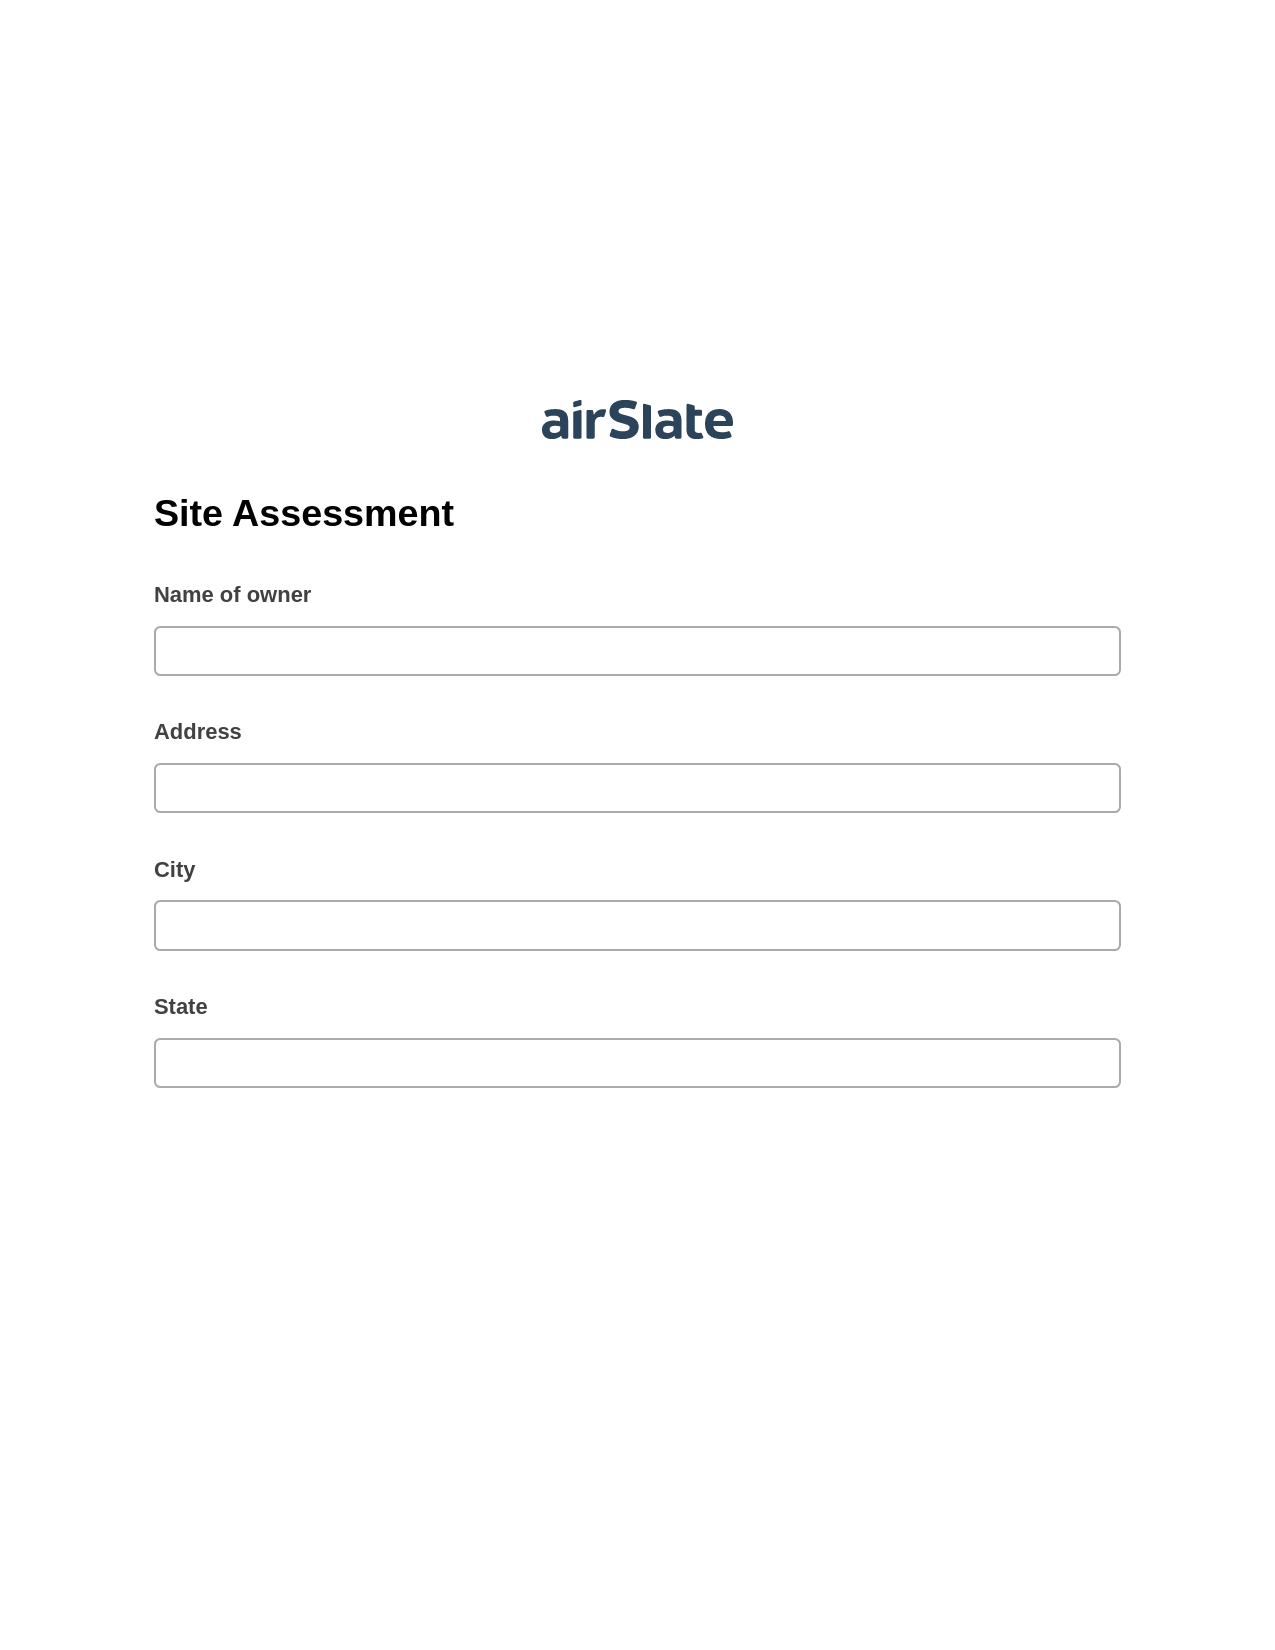 Site Assessment Pre-fill from Litmos bot, Invoke Salesforce Process Bot, Export to Excel 365 Bot